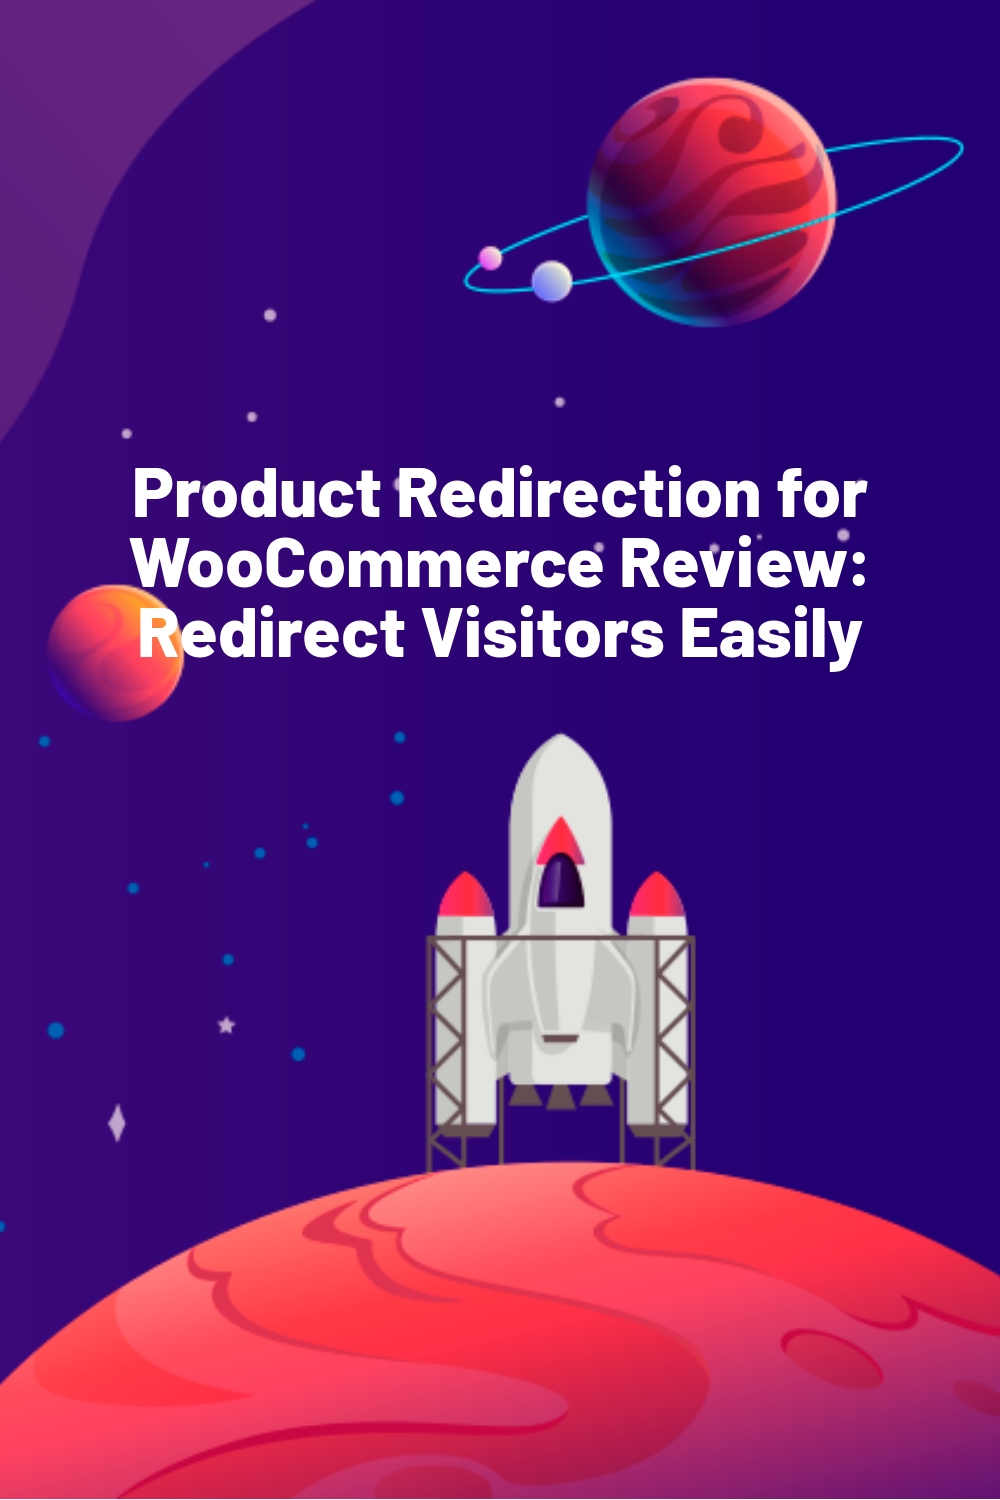 Product Redirection for WooCommerce Review: Redirect Visitors Easily